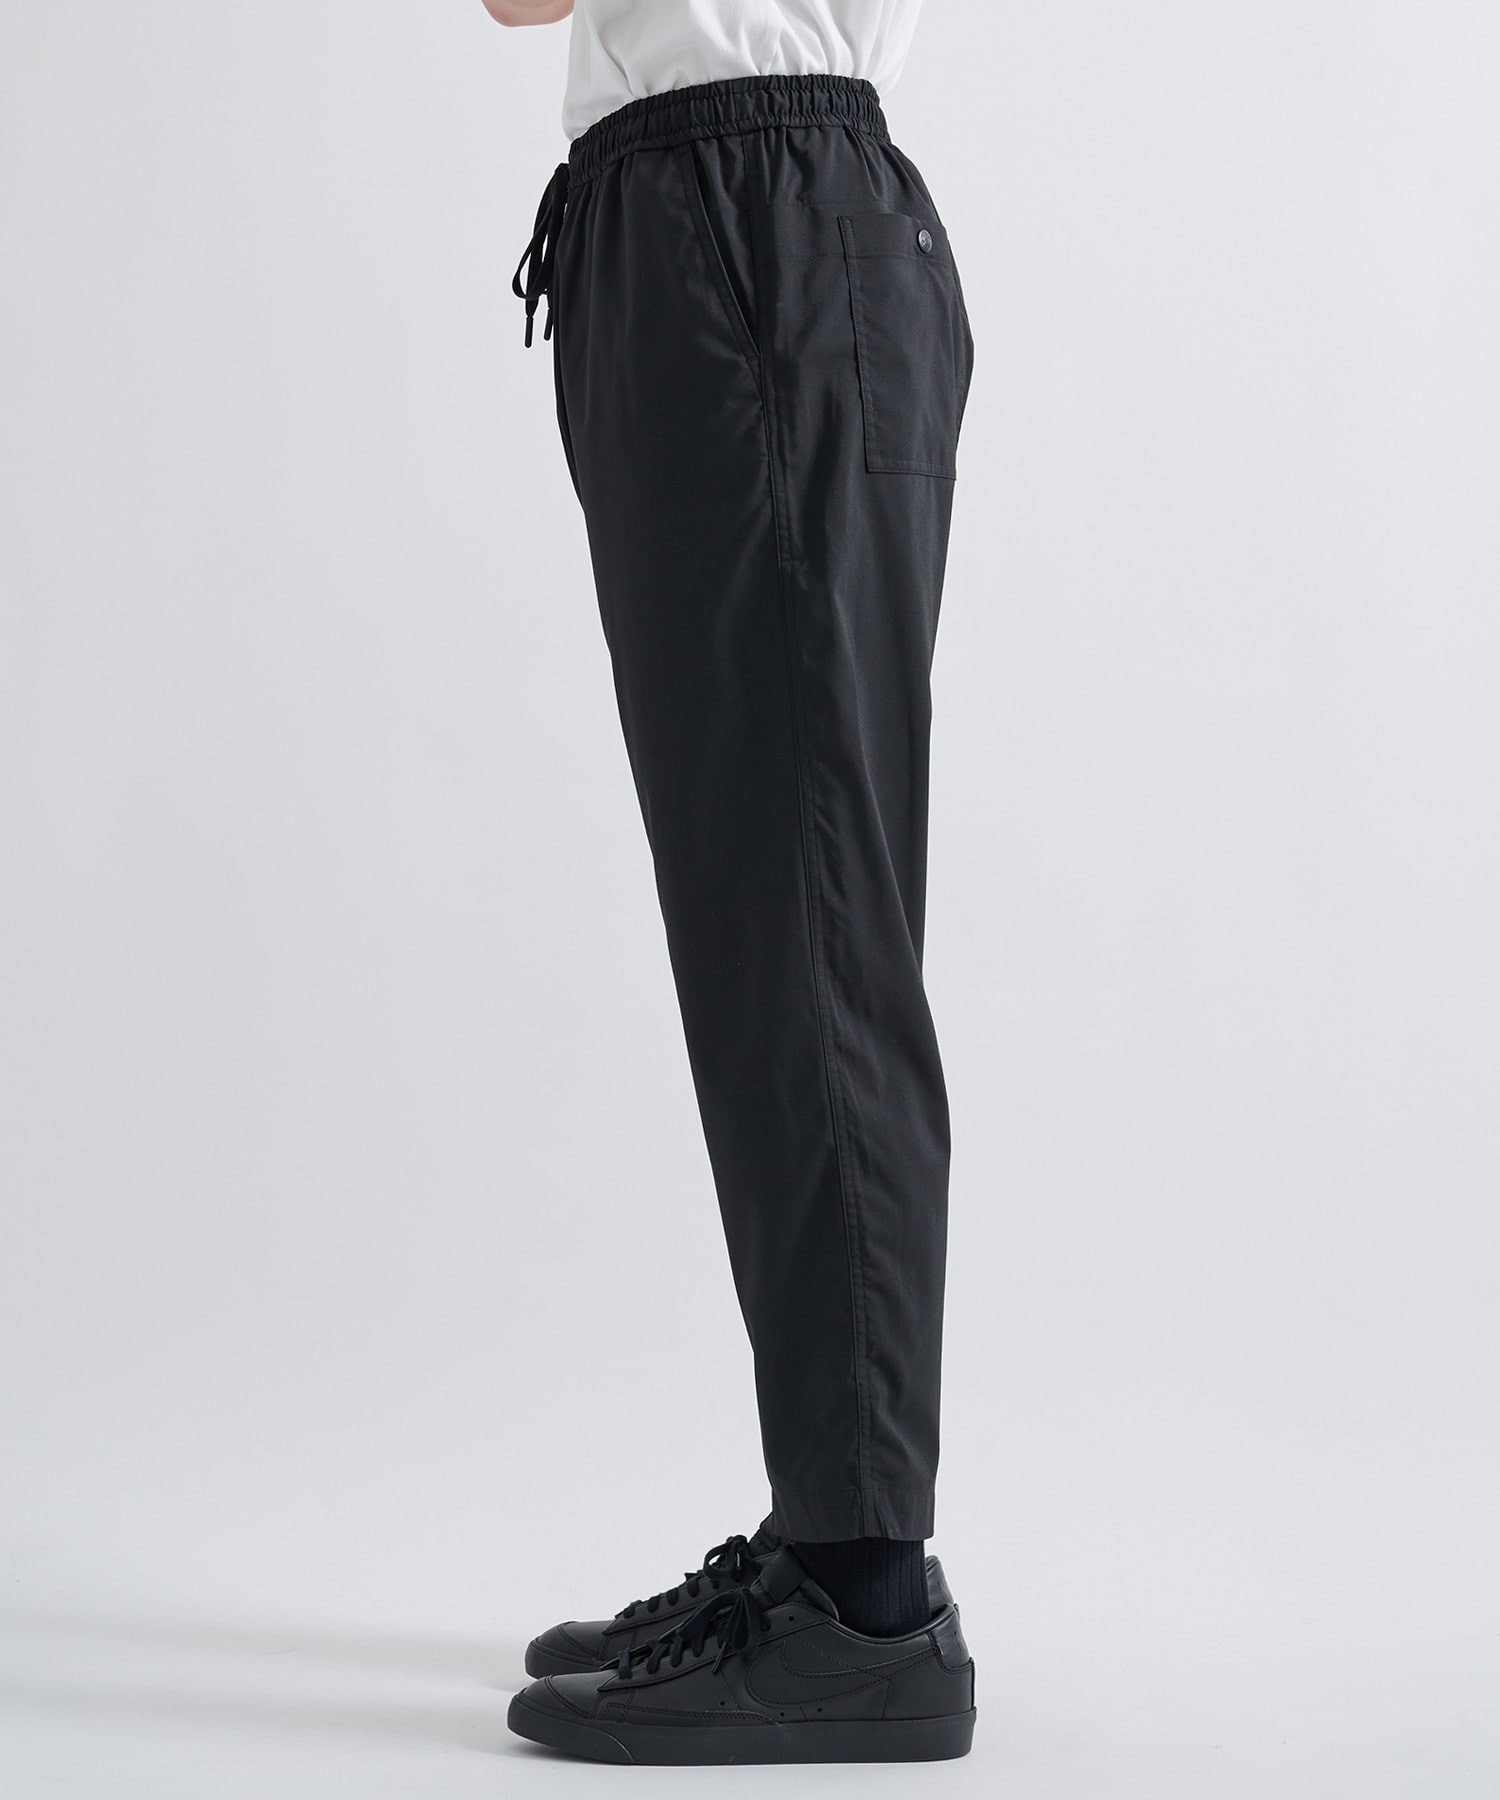 TAPERED PANTS White Mountaineering